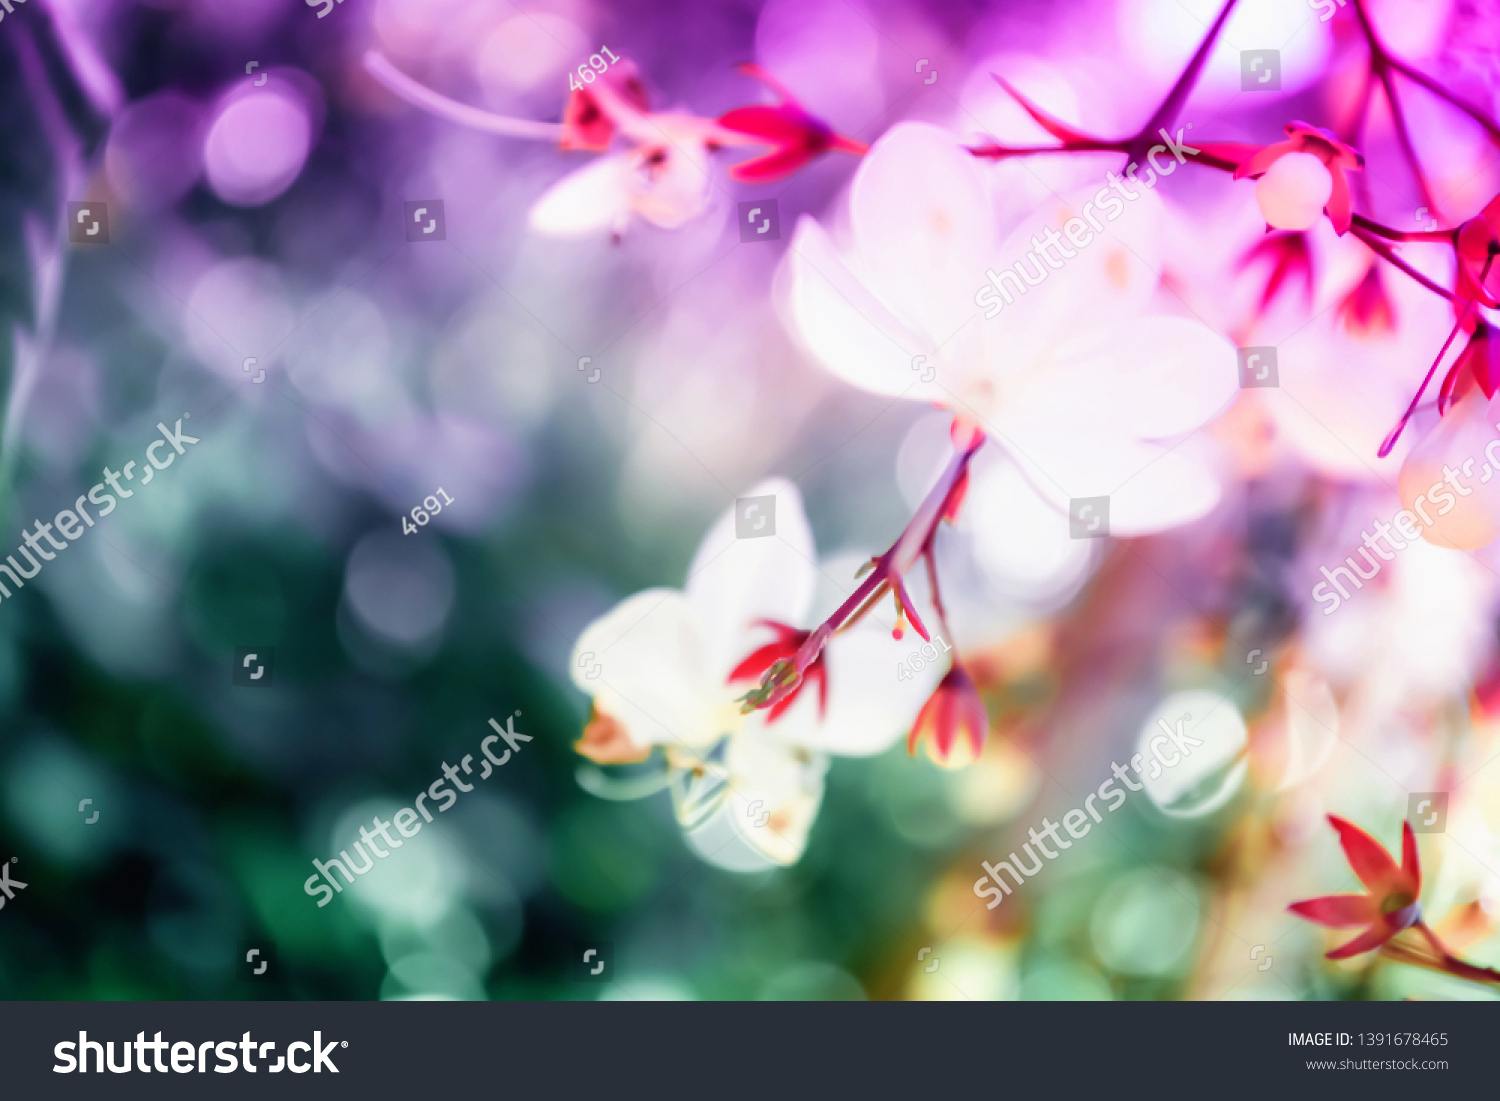 Soft focus small white flower with colorful bokeh spring of nature background #1391678465